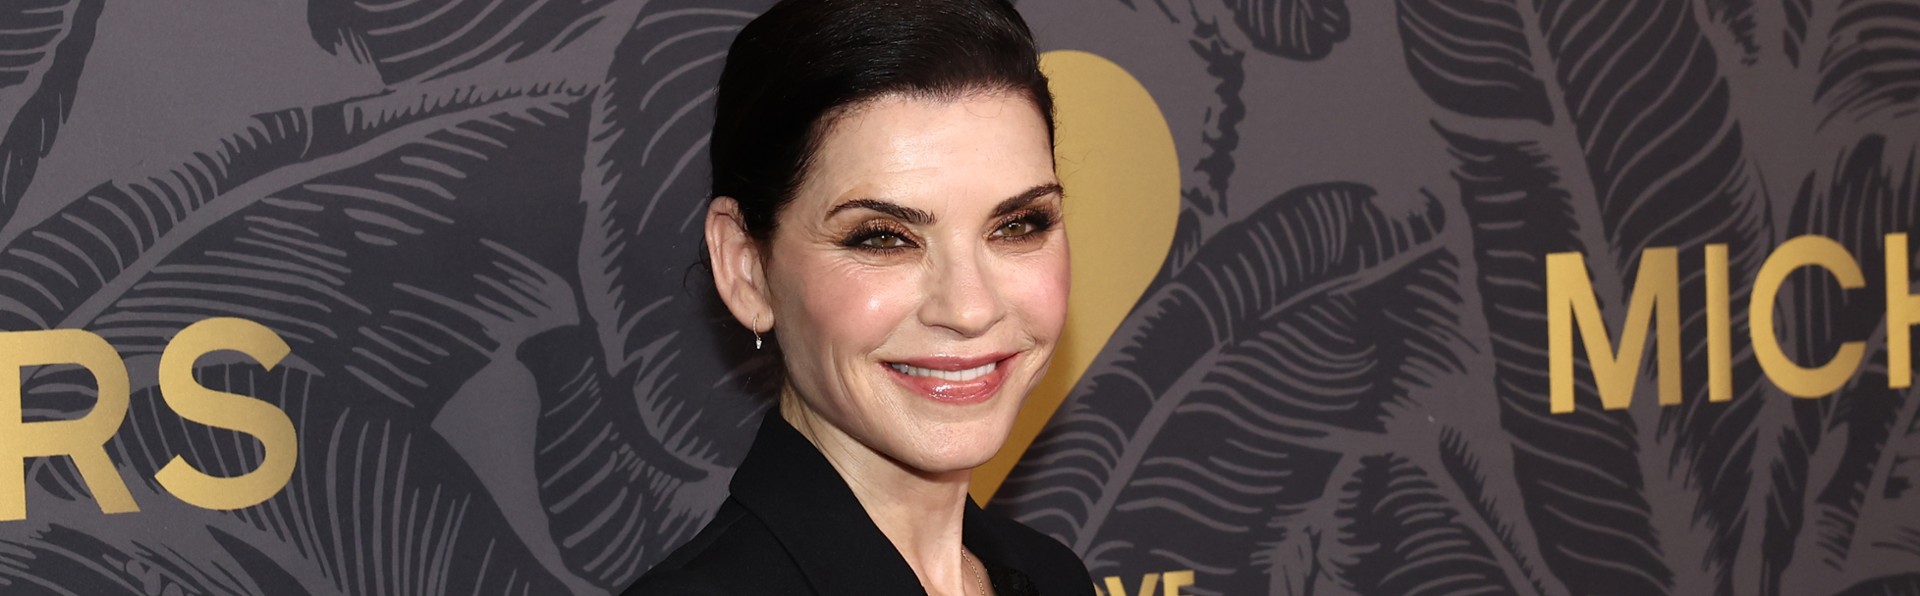 Julianna Margulies apologizes. The actress criticized individuals supporting Palestine